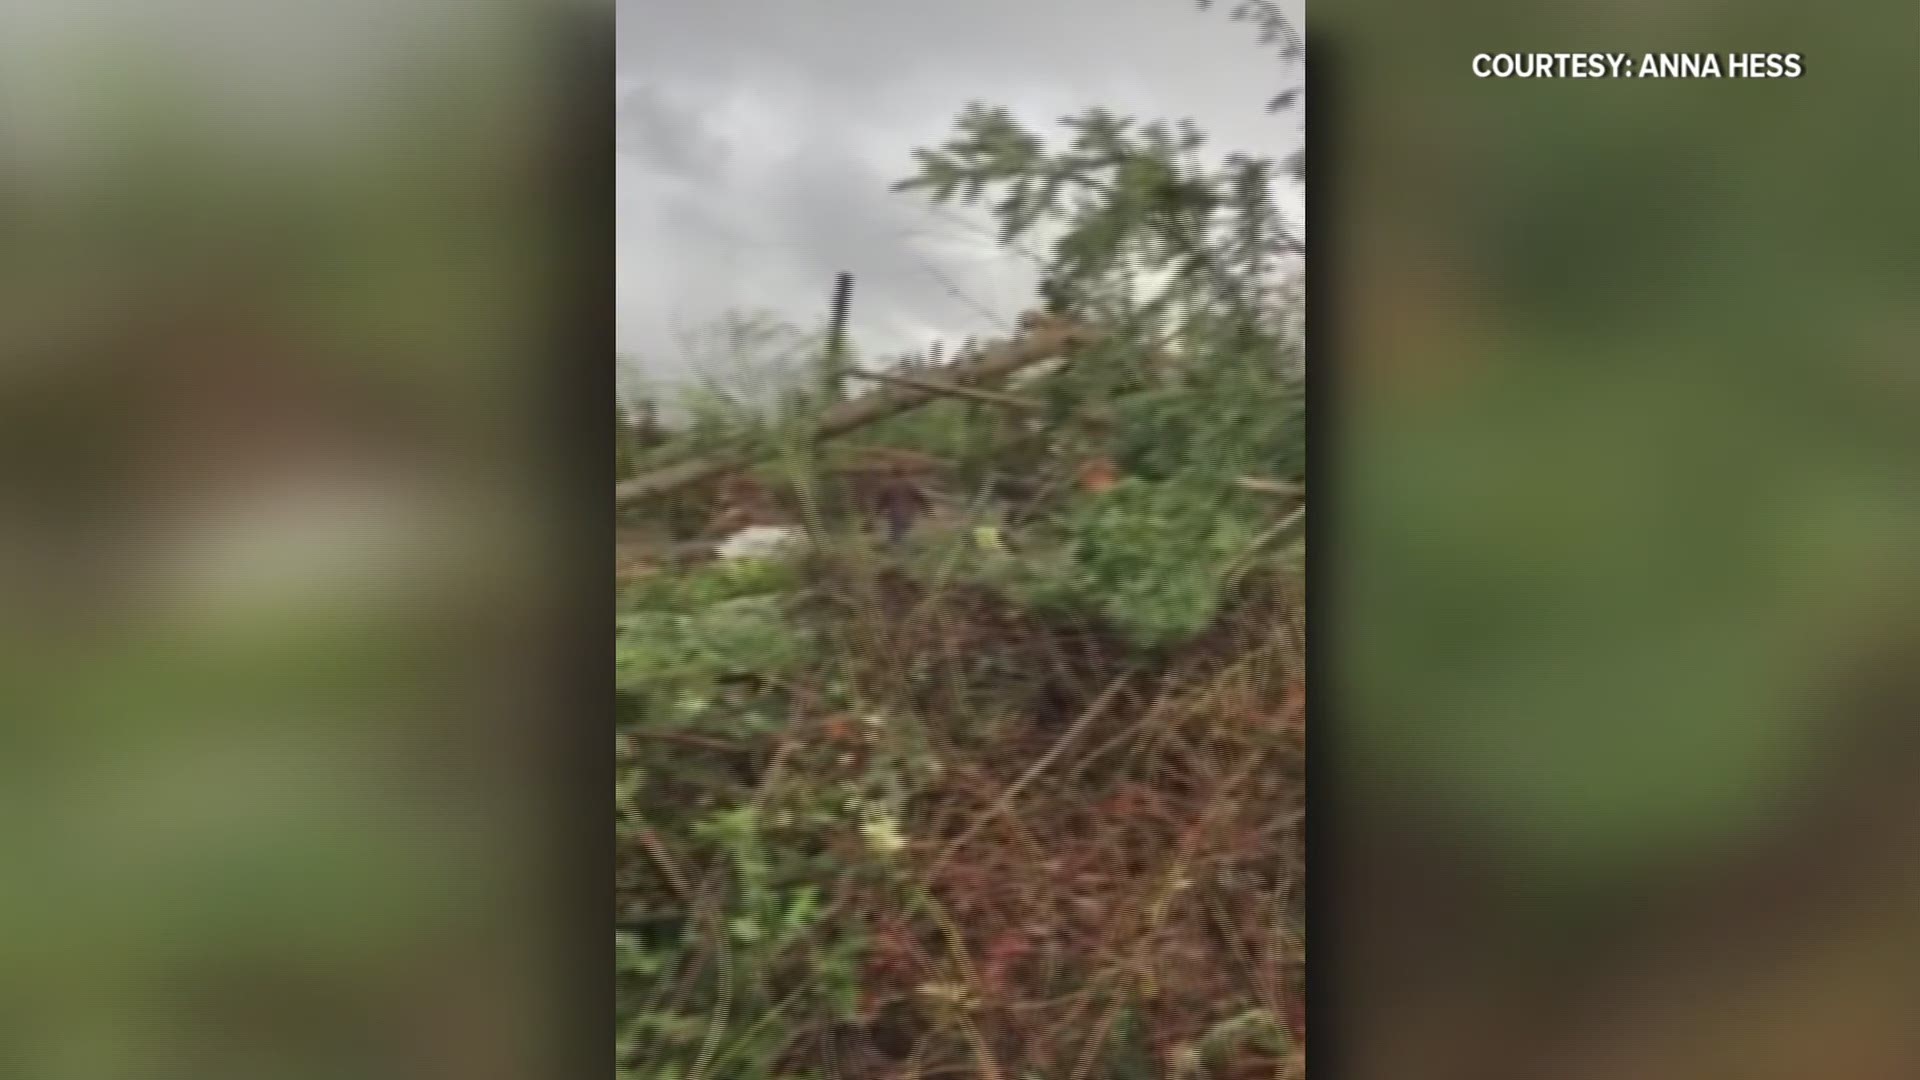 The National Weather Service confirmed a tornado caused damage in Kitsap County Tuesday afternoon.